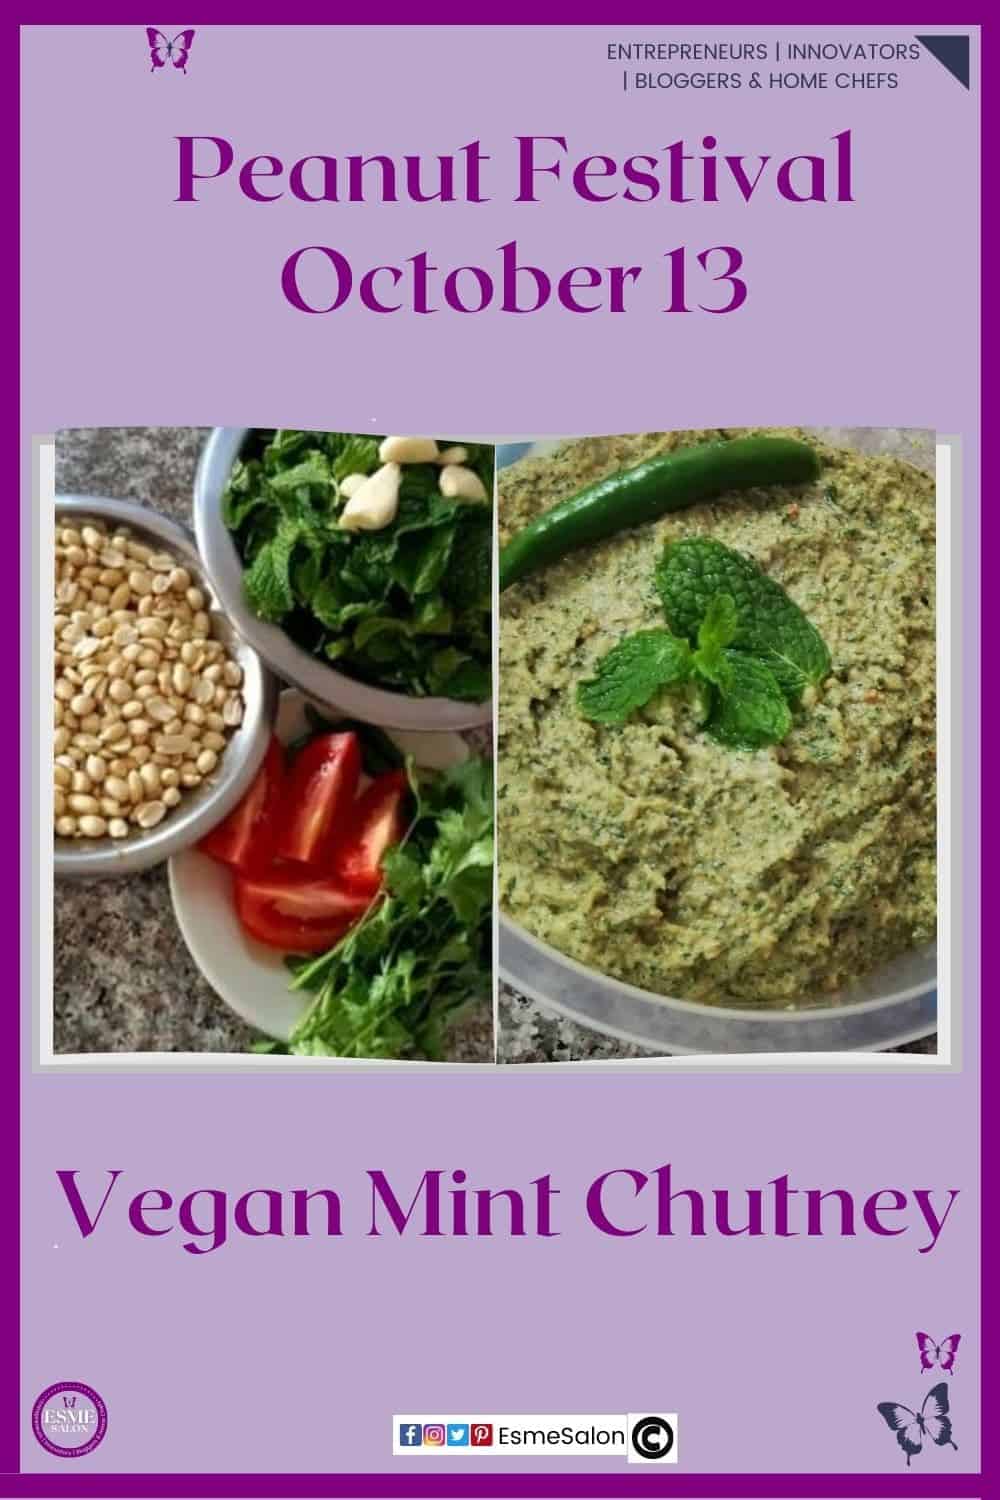 an image of a plastic contained with Vegan Mint Chutney with a chili and mint sprig and ingredients with peanuts on the side